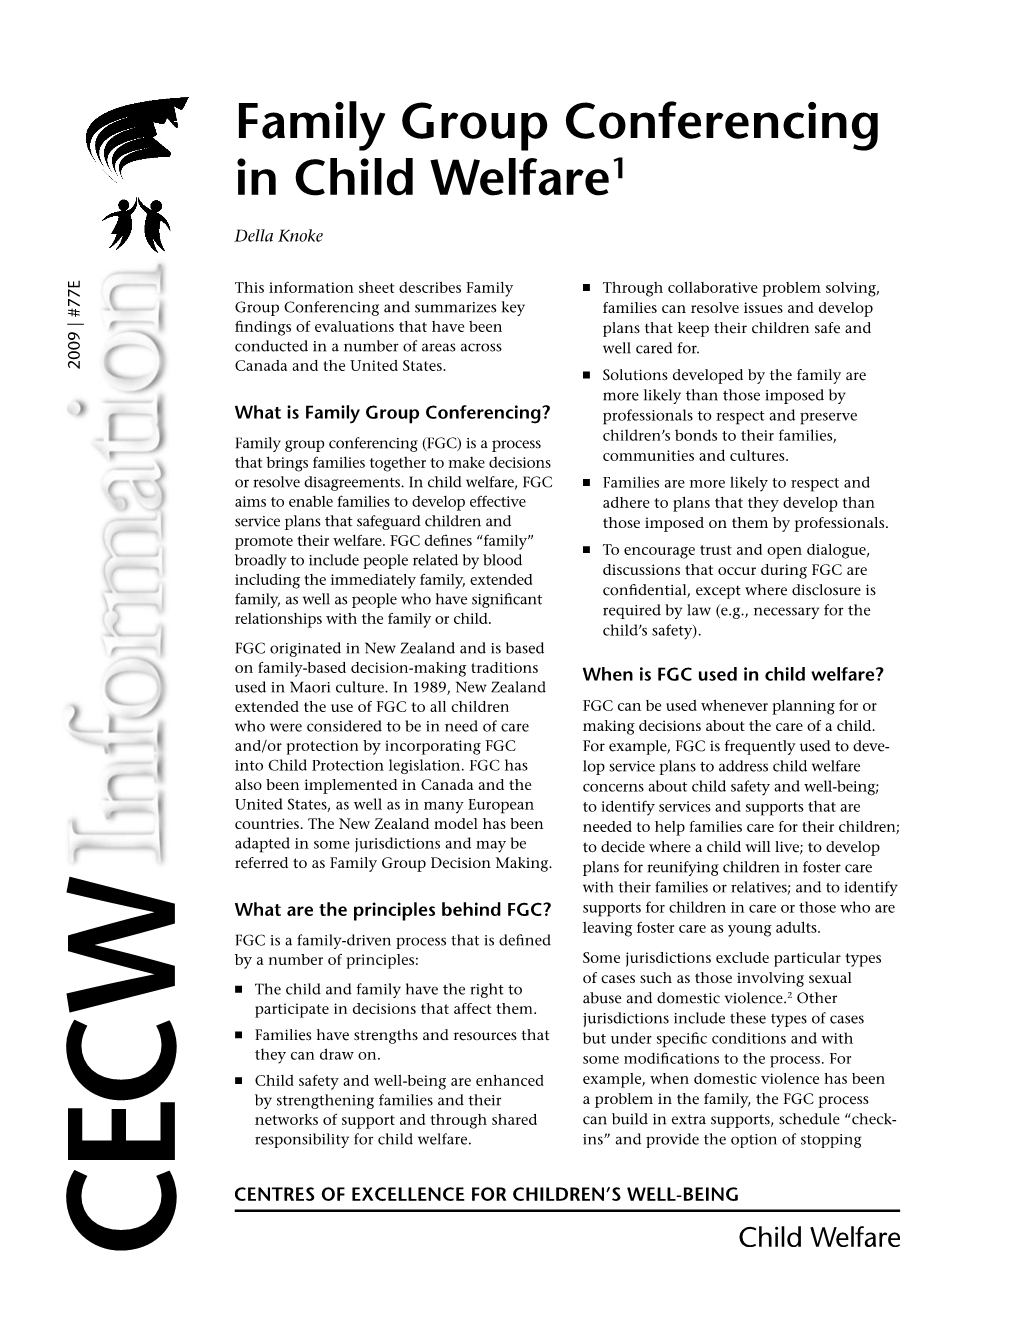 Family Group Conferencing in Child Welfare1